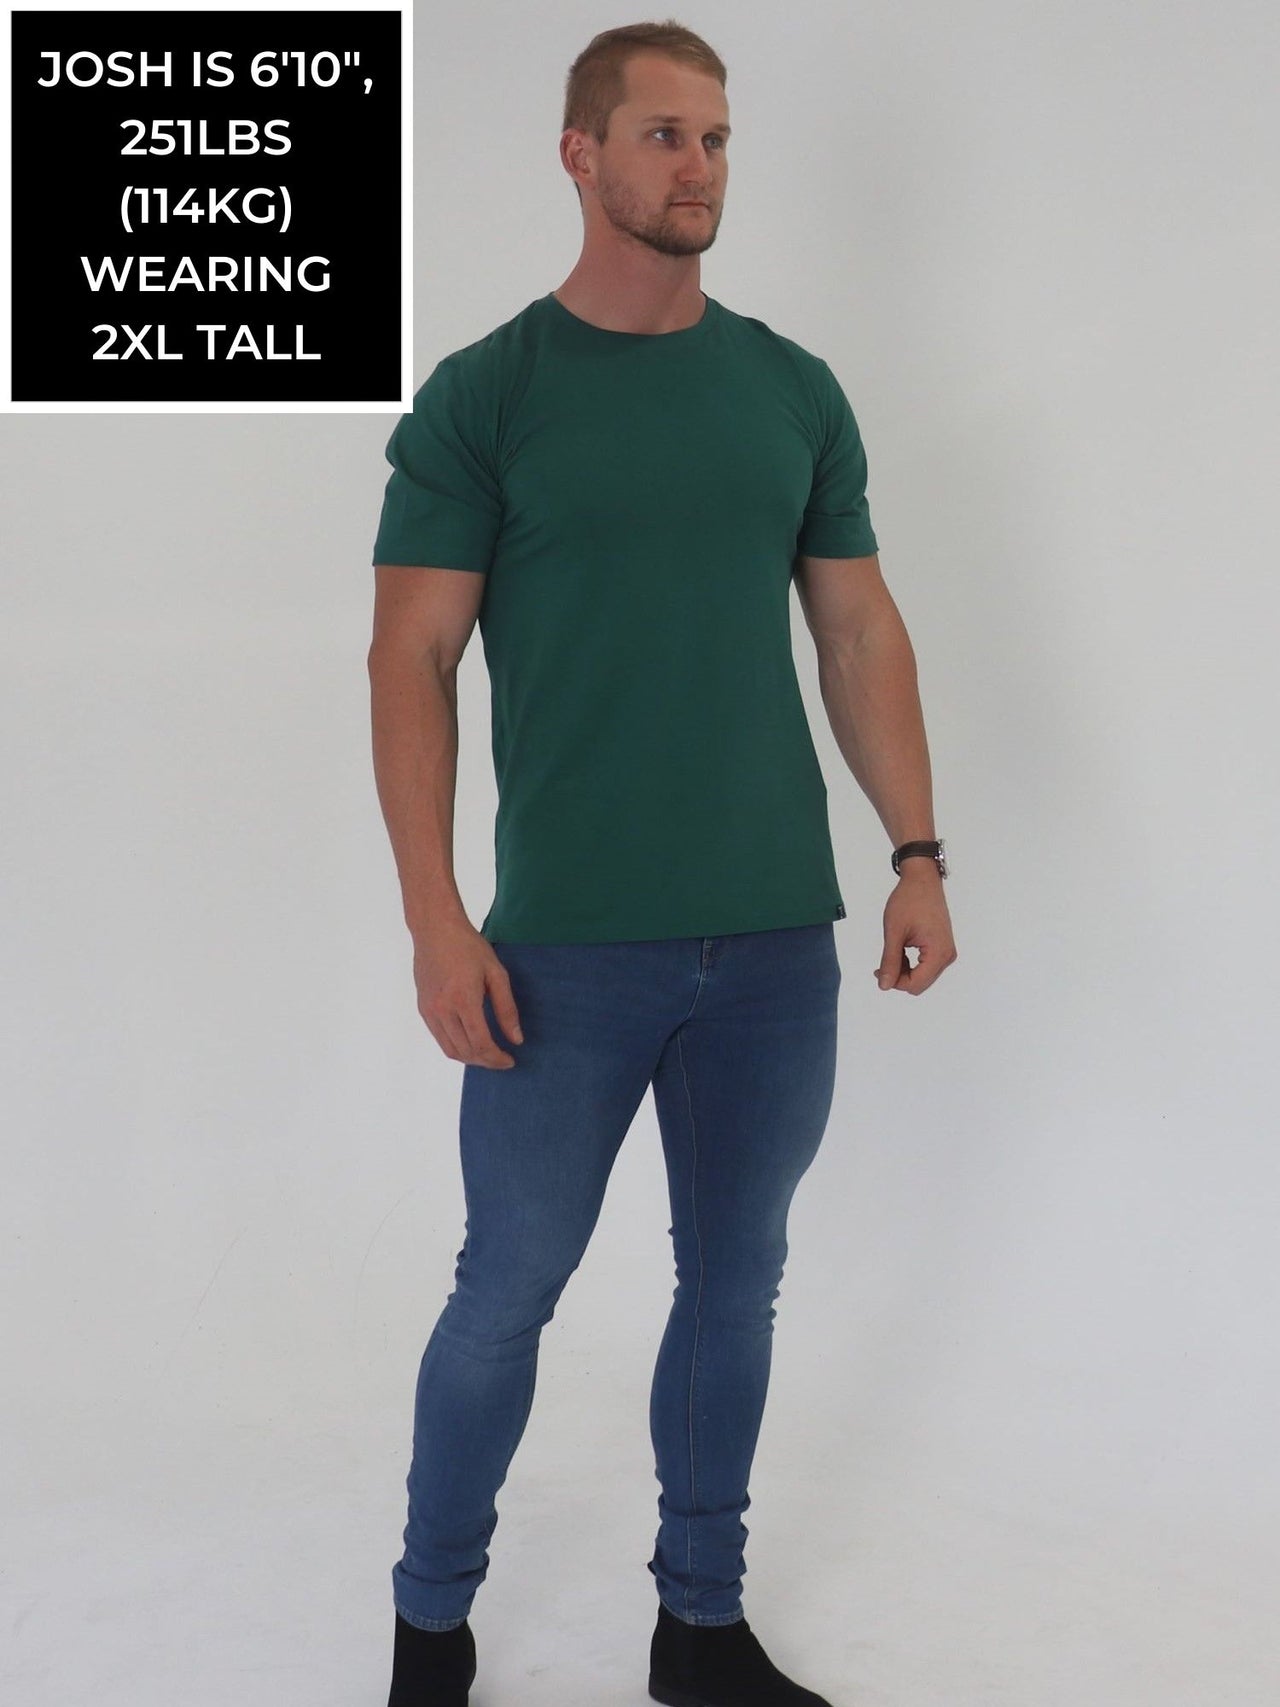 A head to toe shot of a tall and broad guy in the studio wearing a dark green 2XL tall slim t-shirt.